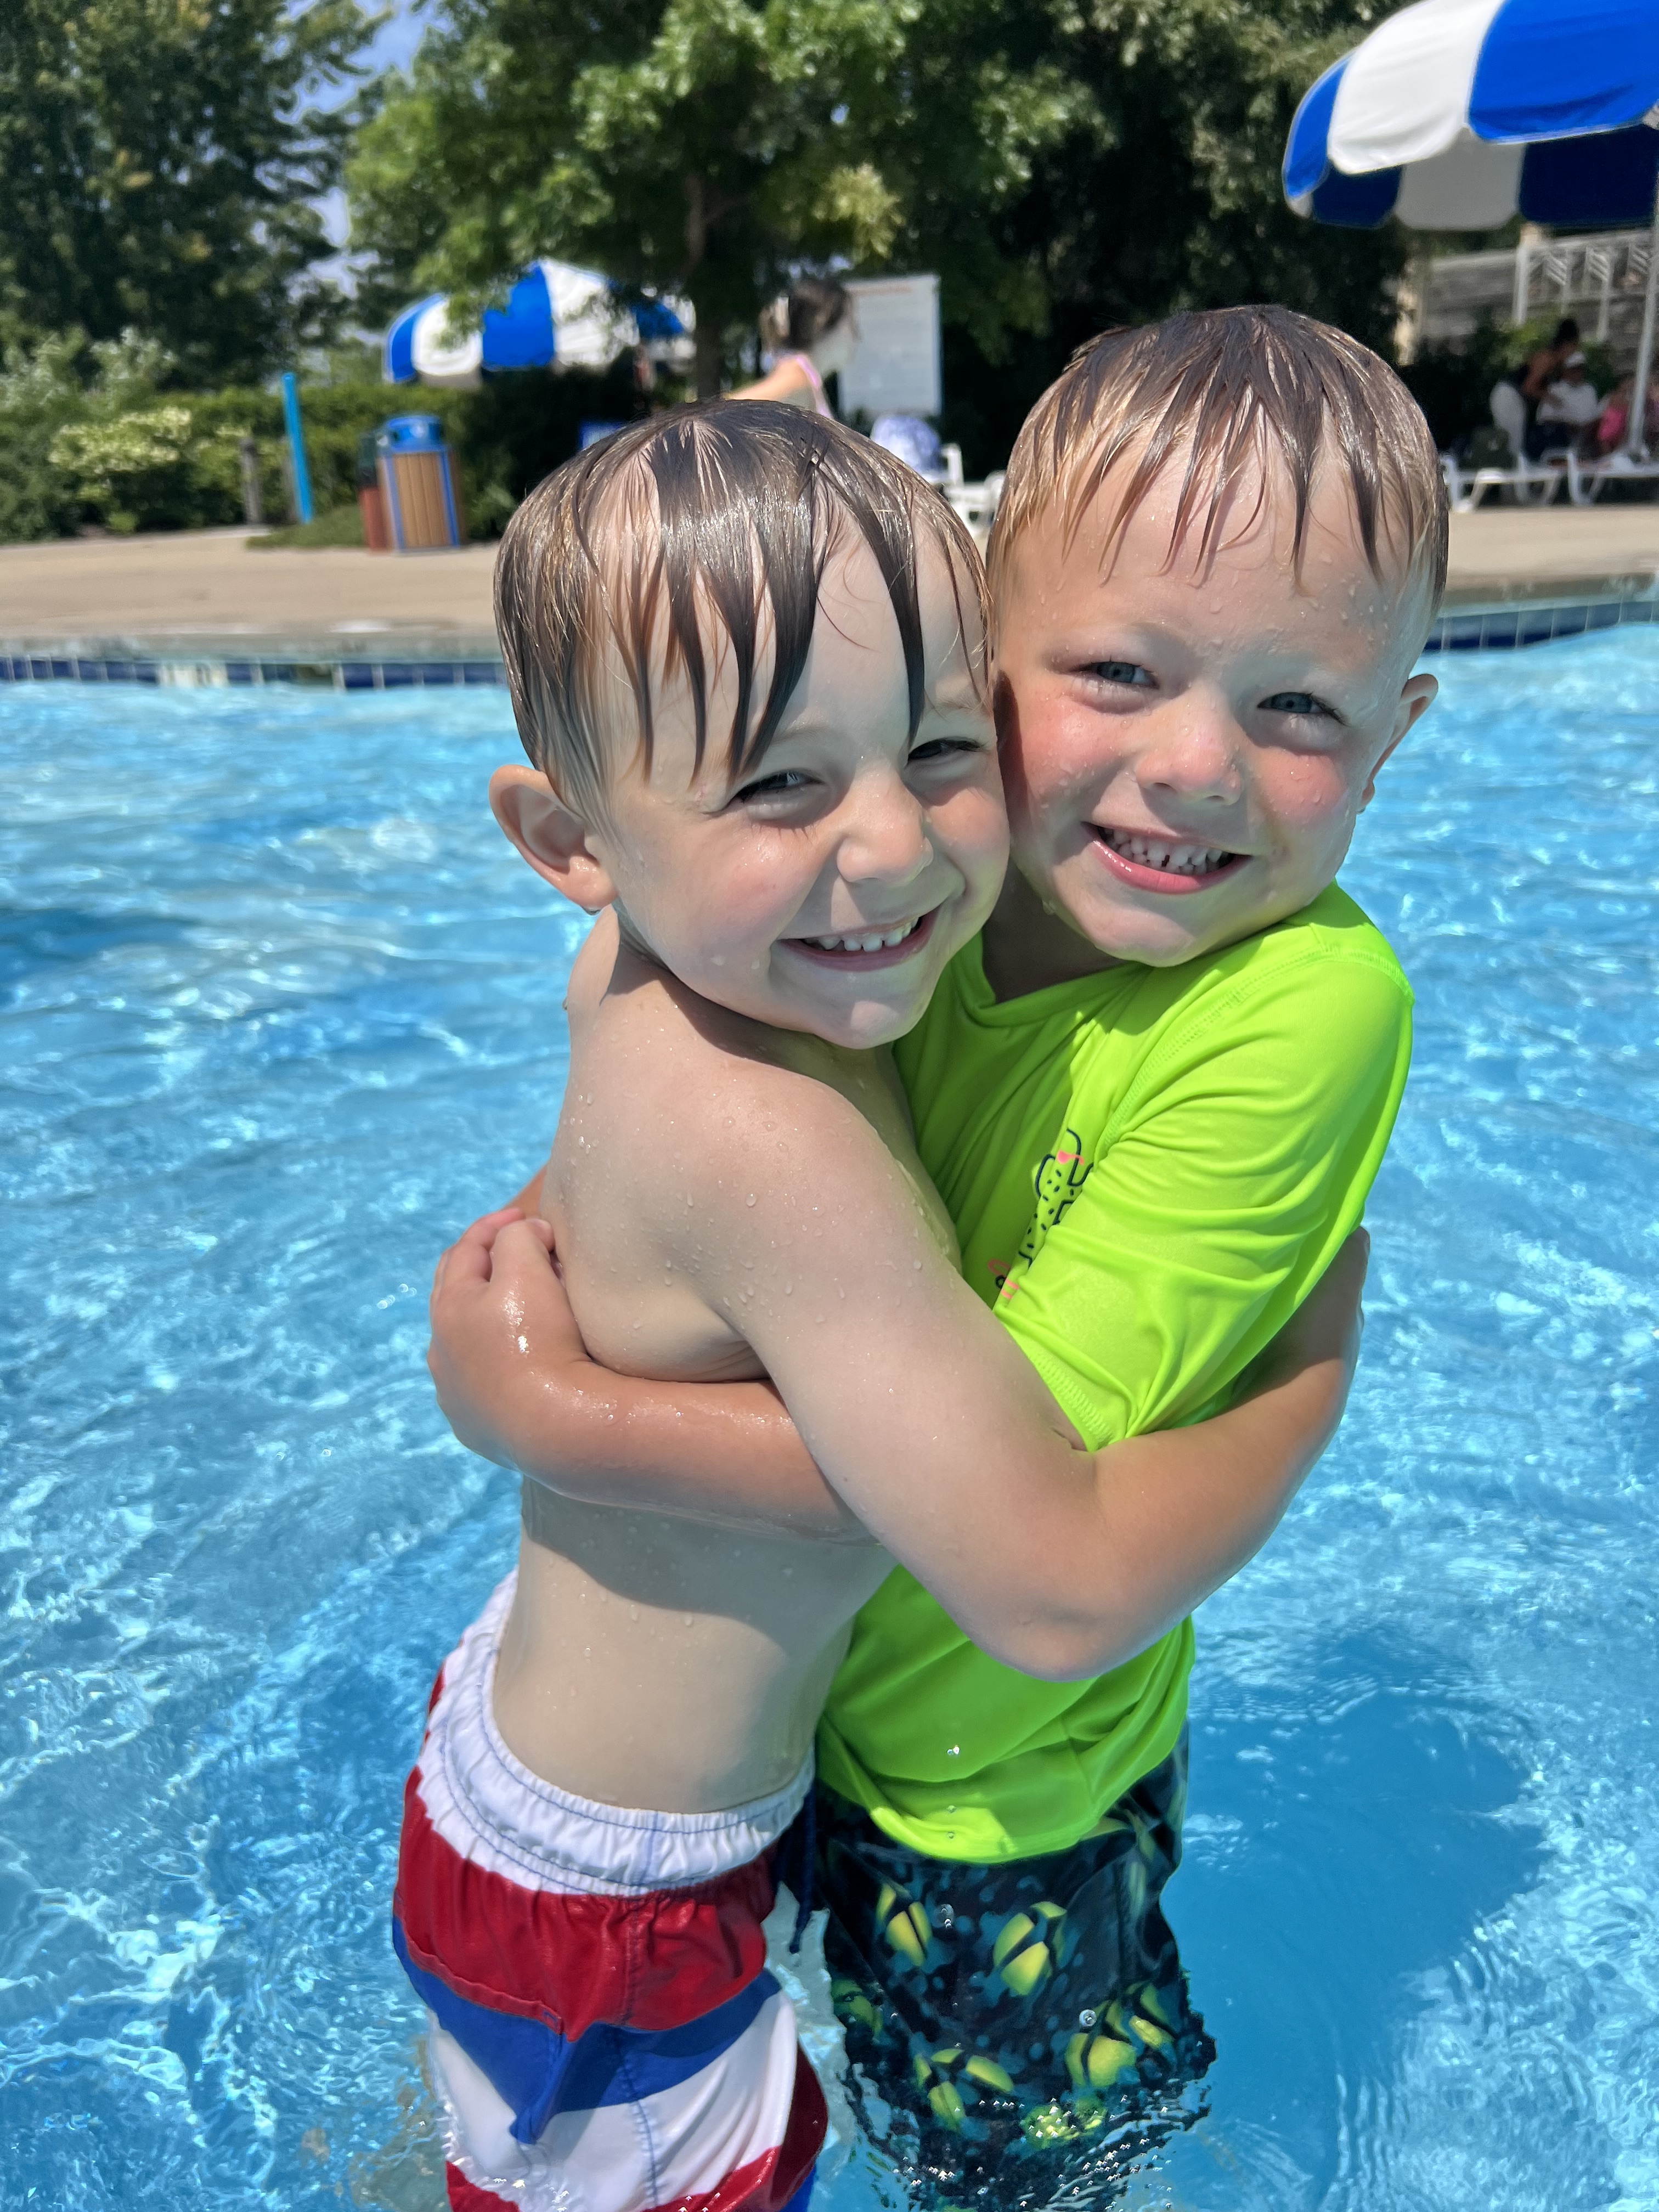 Two children hugging and smiling while in a pool